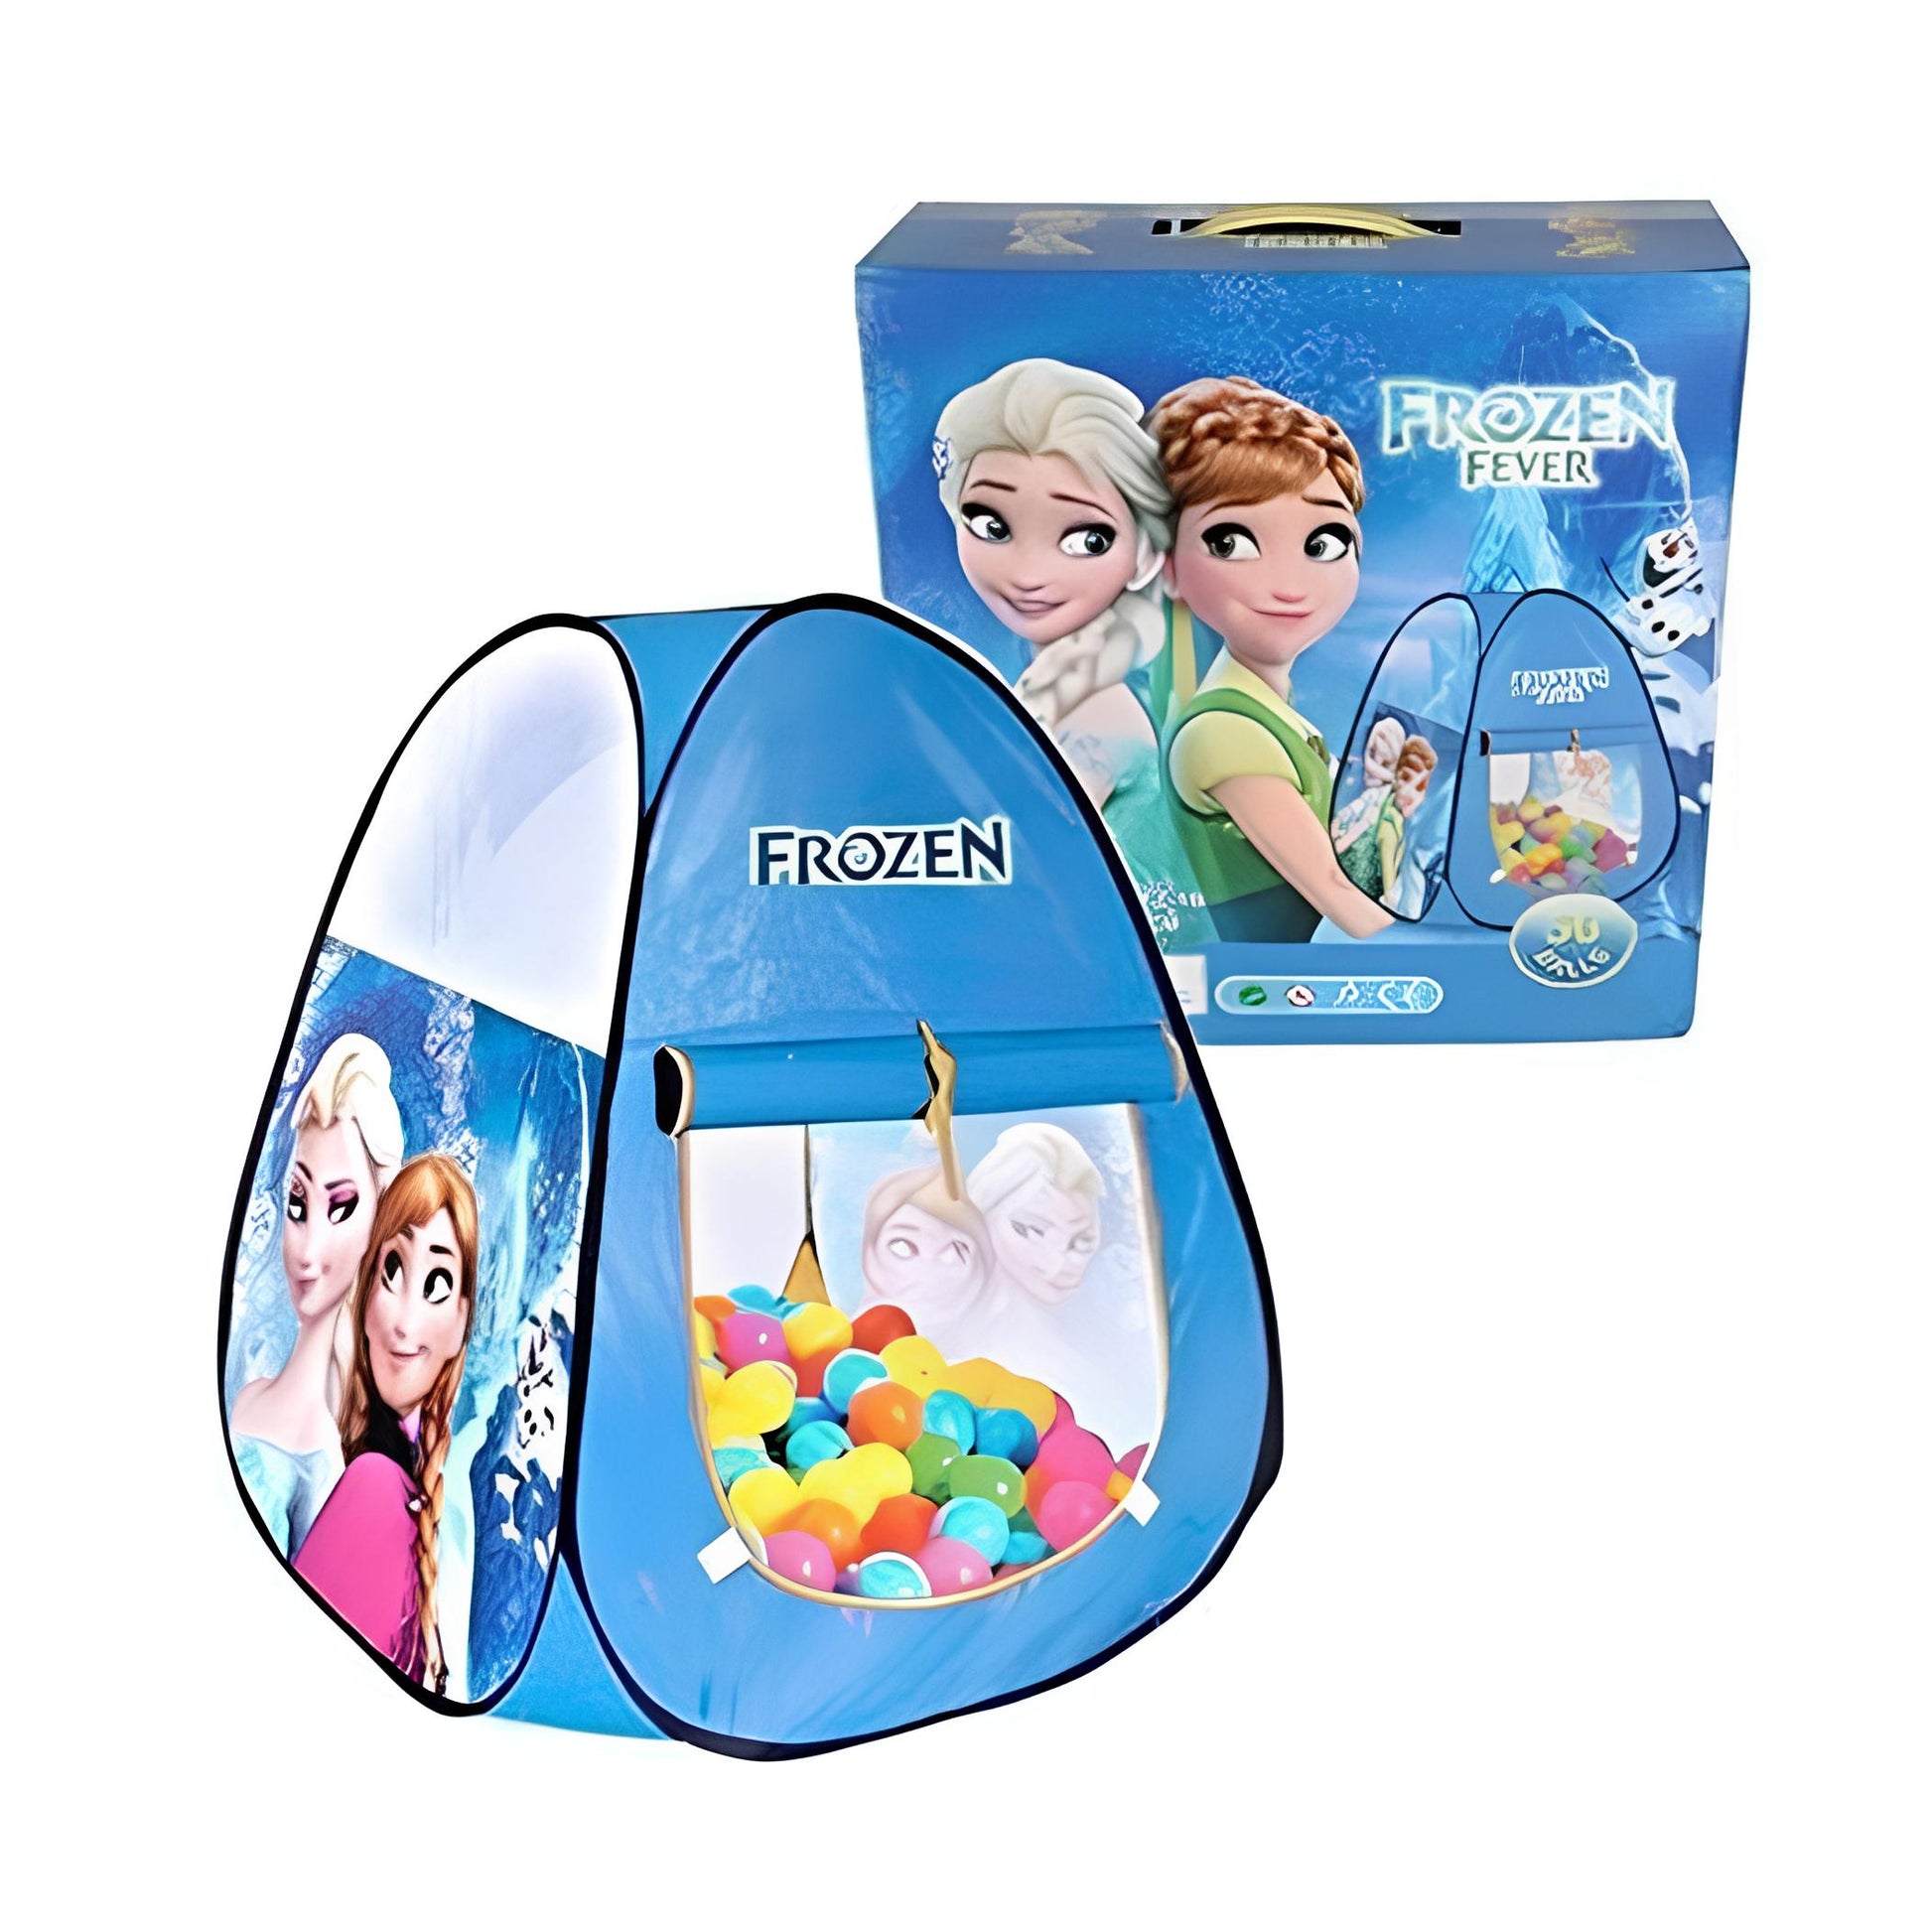 Frozen Fever Play Tent | Ball Pool Tent